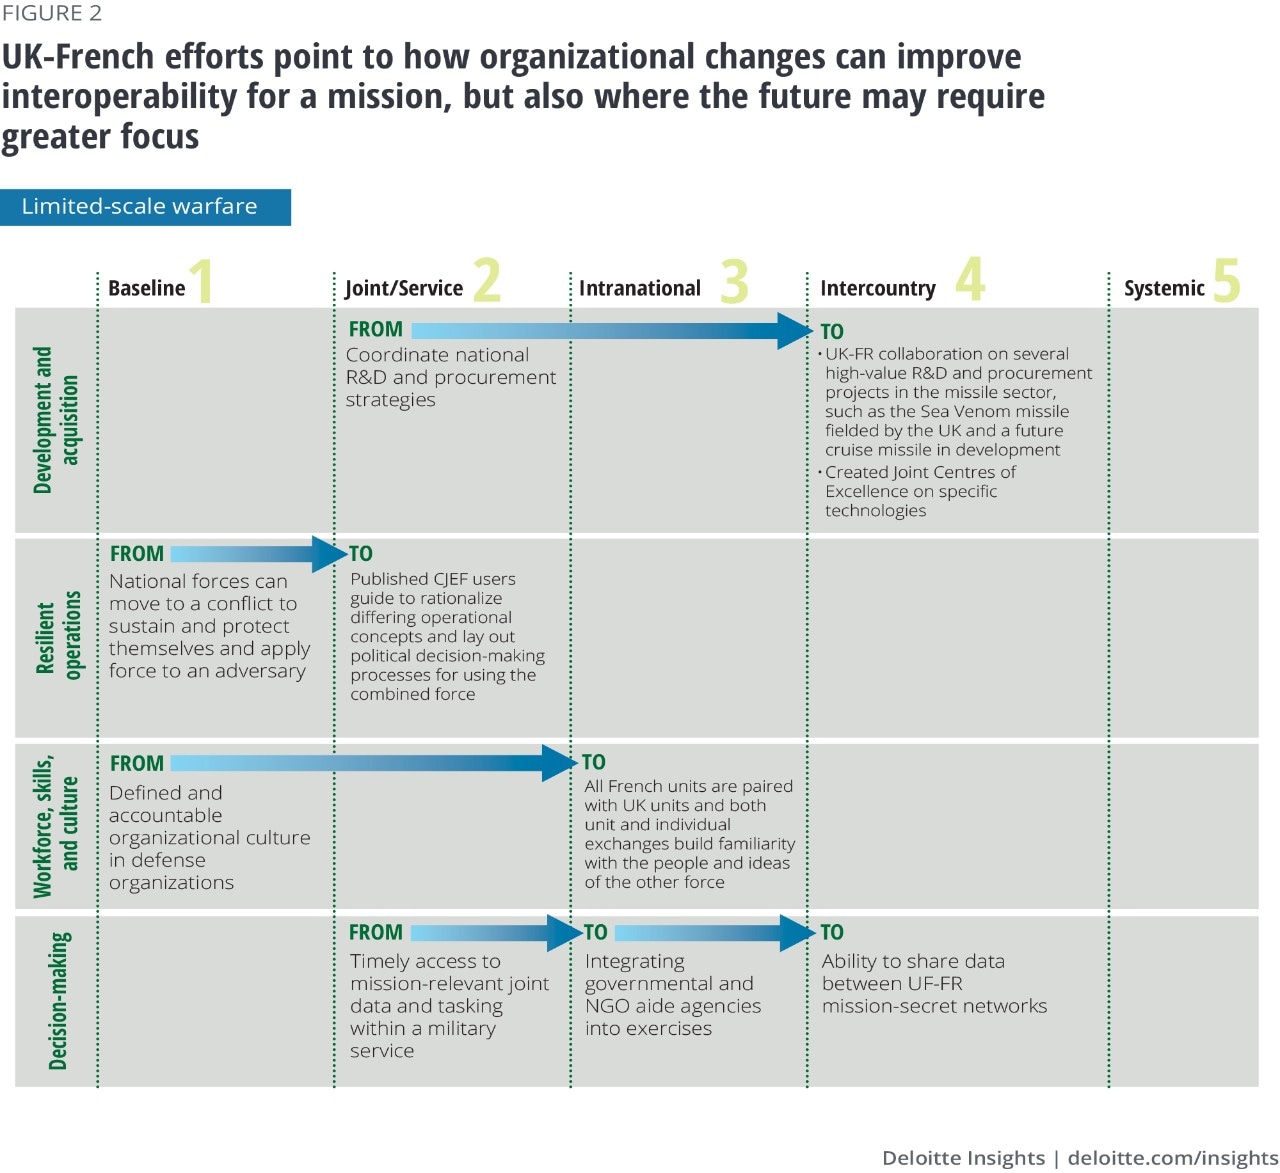 Figure 2. UK-French efforts point to how organizational changes can improve interoperability for a mission, but also where the future may require greater focus